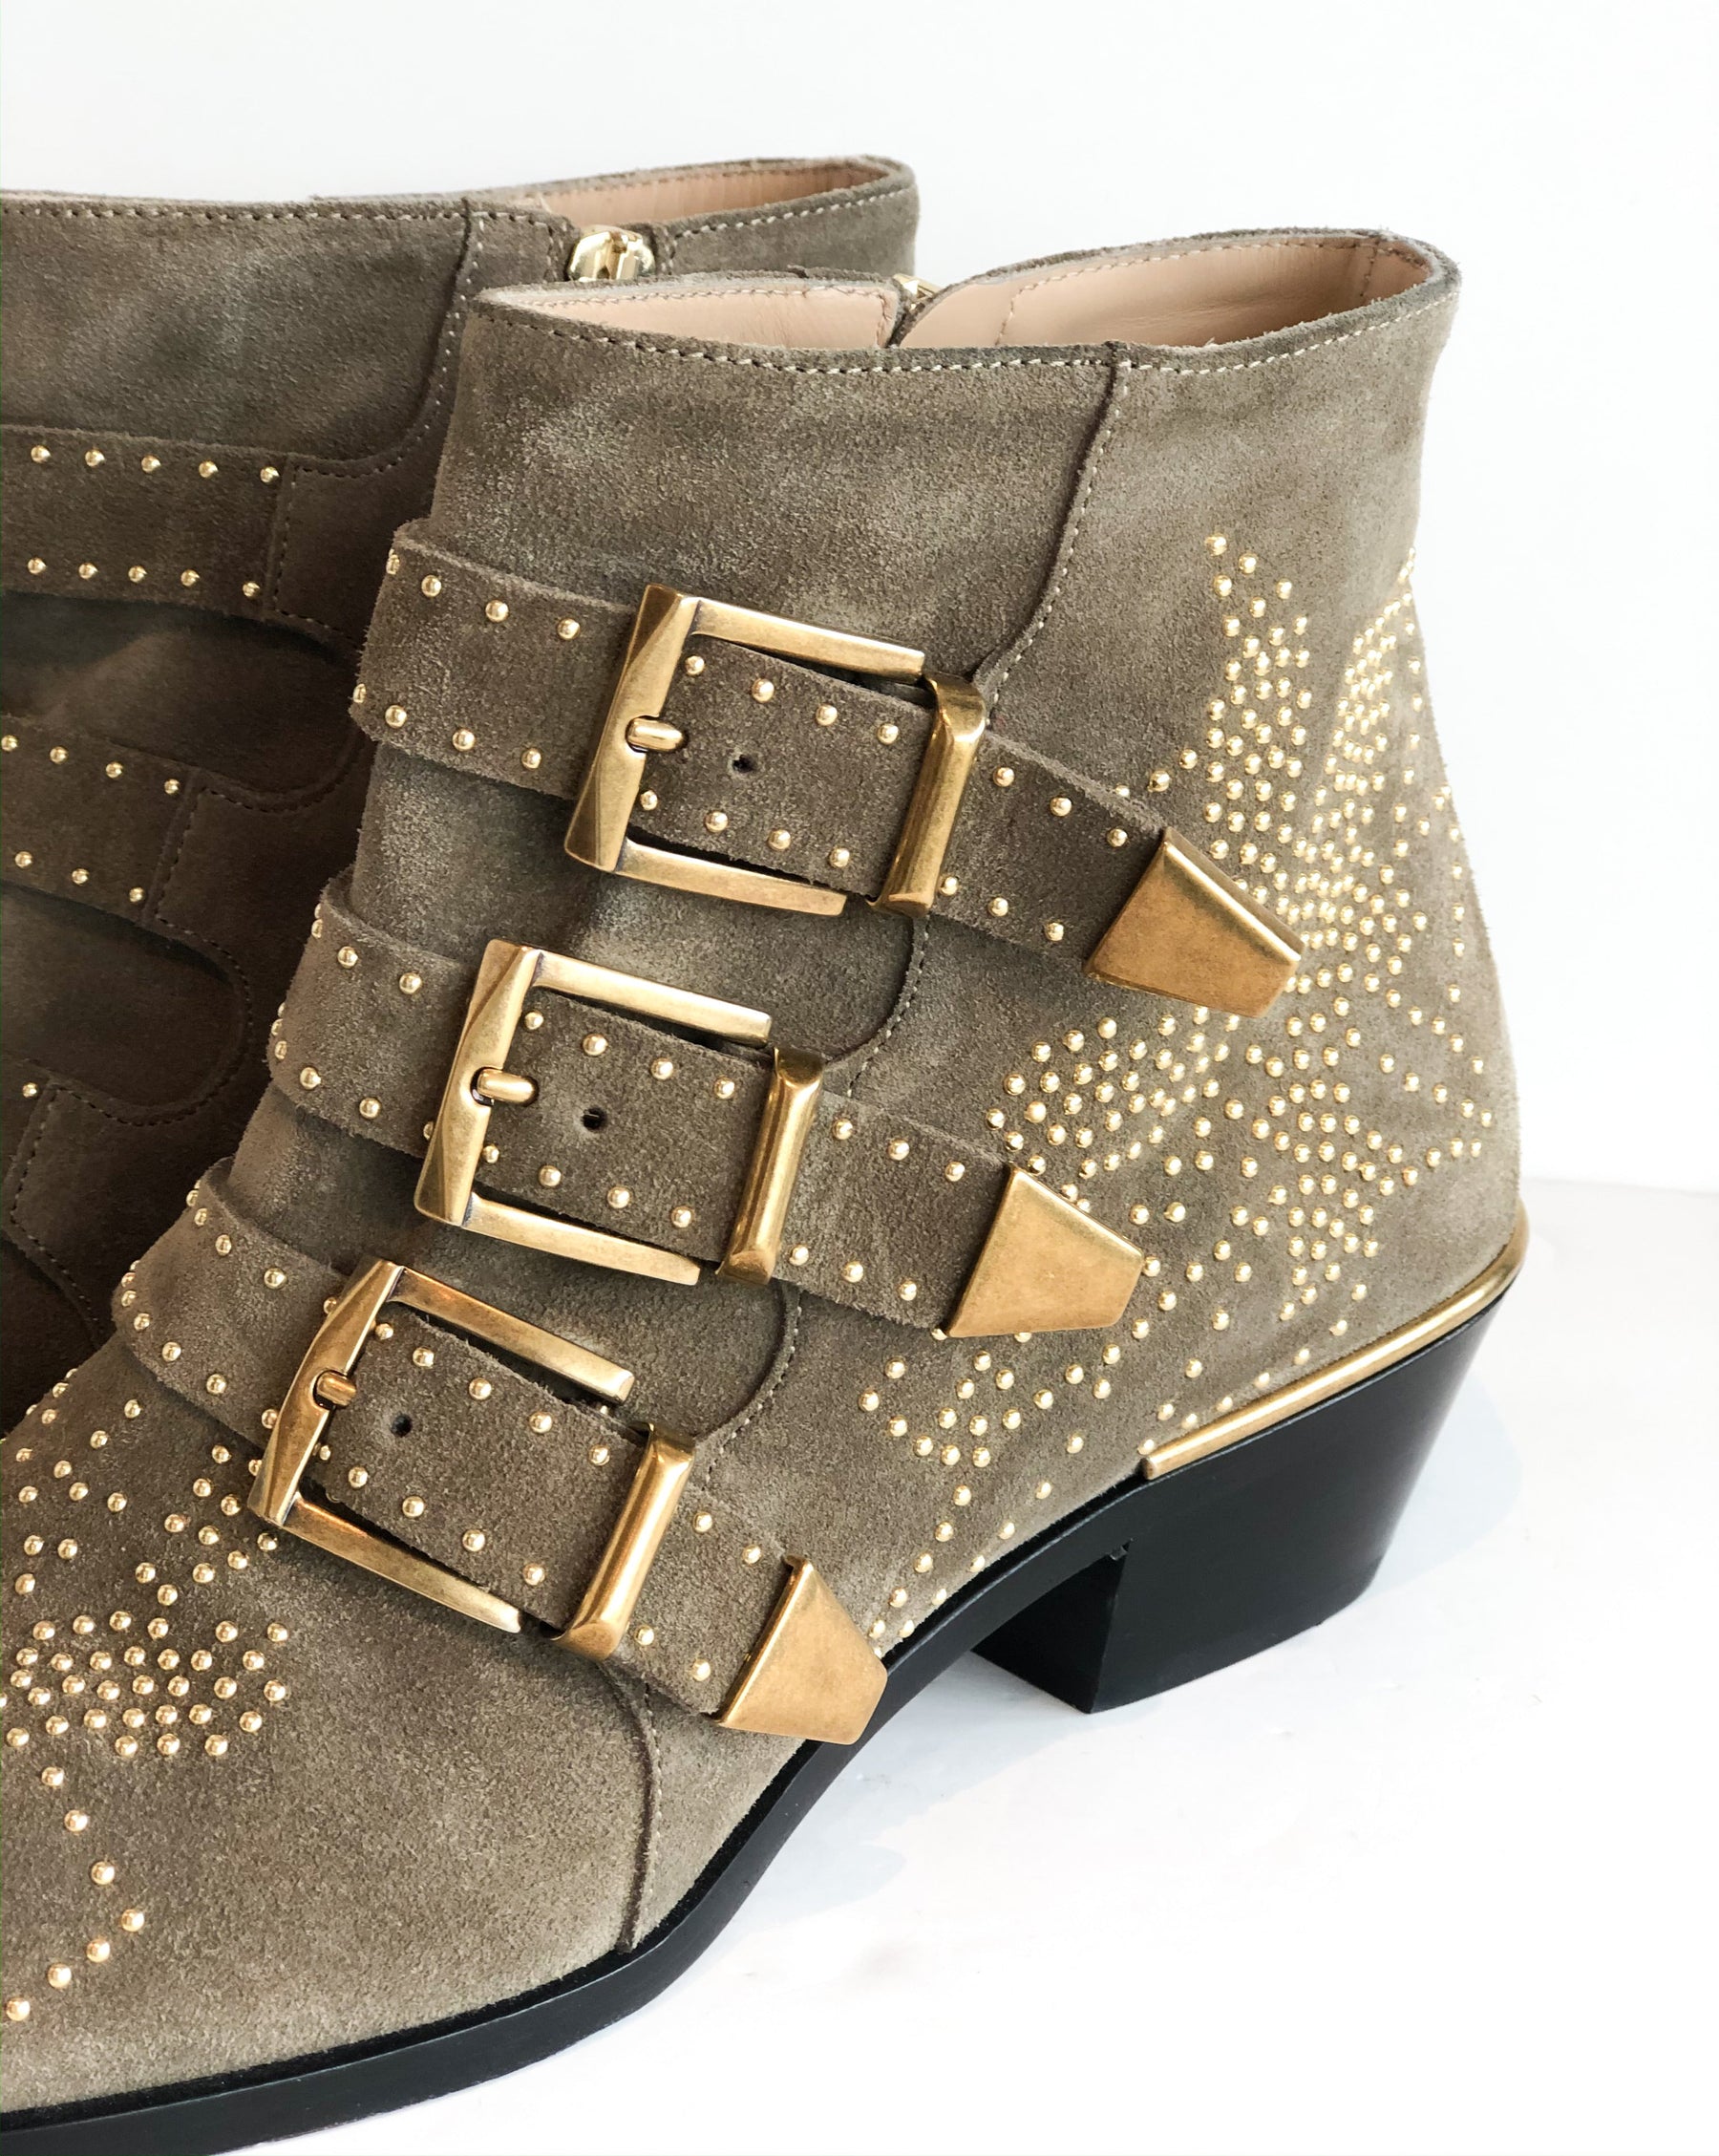 Chloe Taupe Stud Booties Gold Details